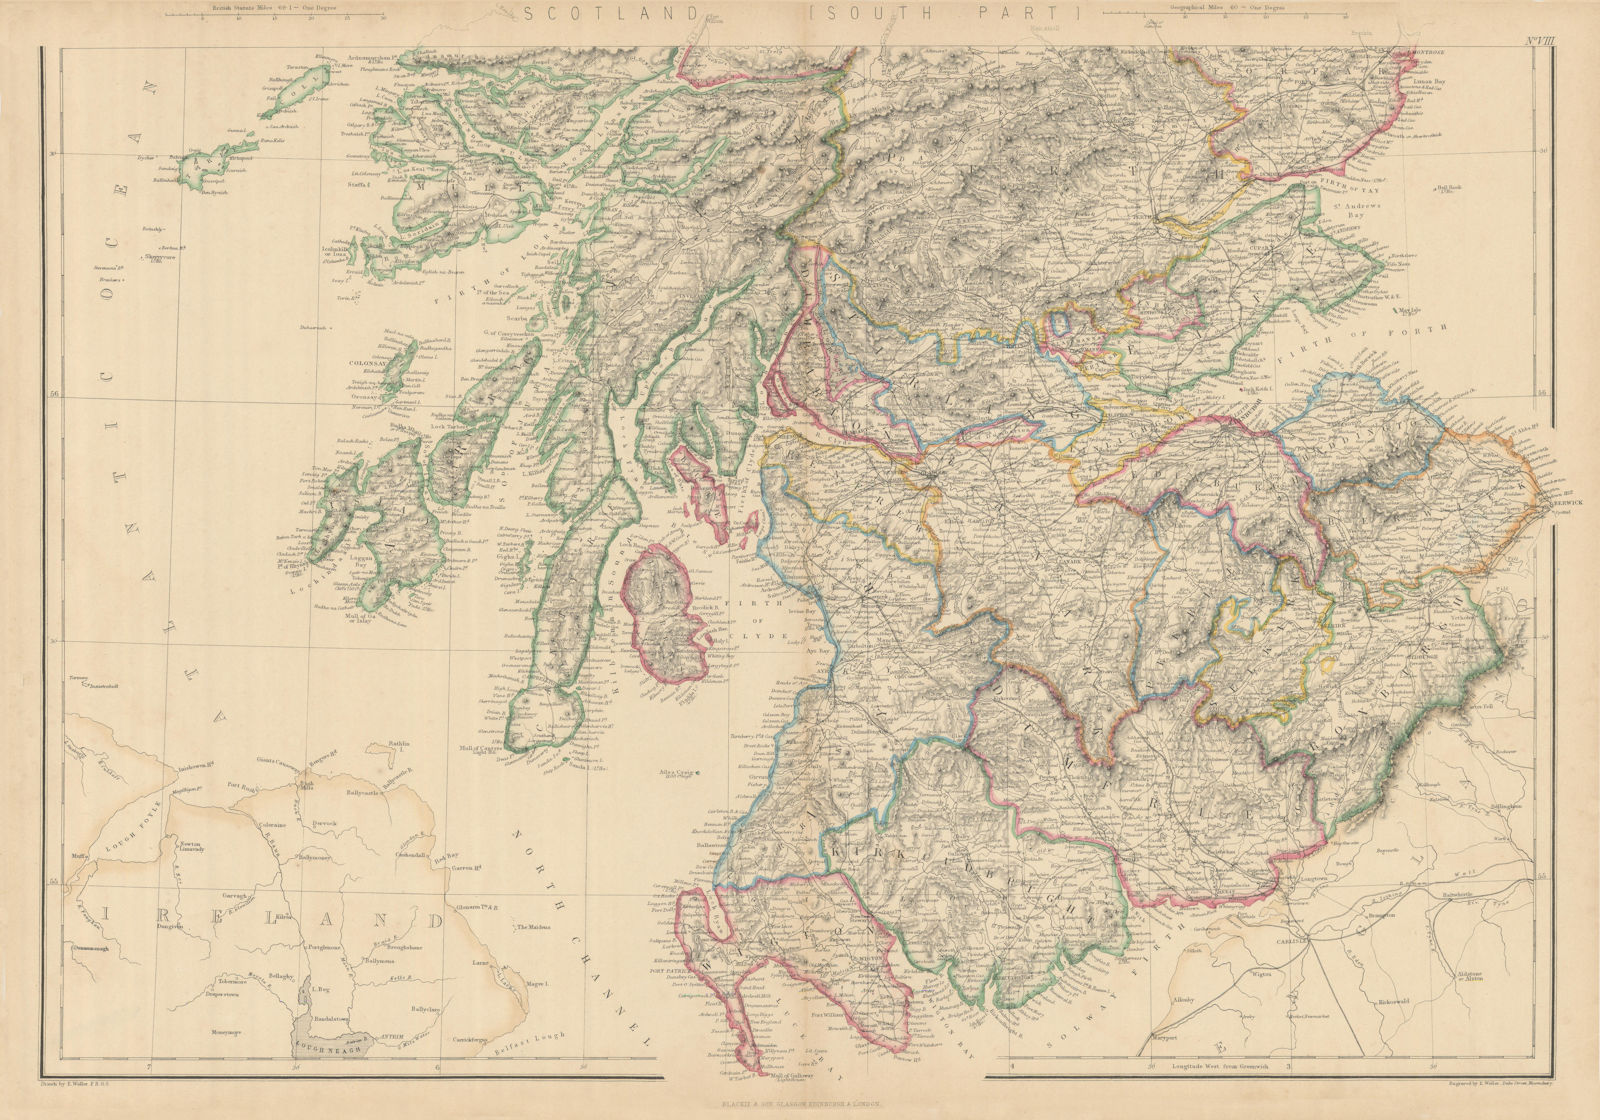 Associate Product Scotland (South) by Edward Weller. Borders Lothian Central Strathclyde 1860 map